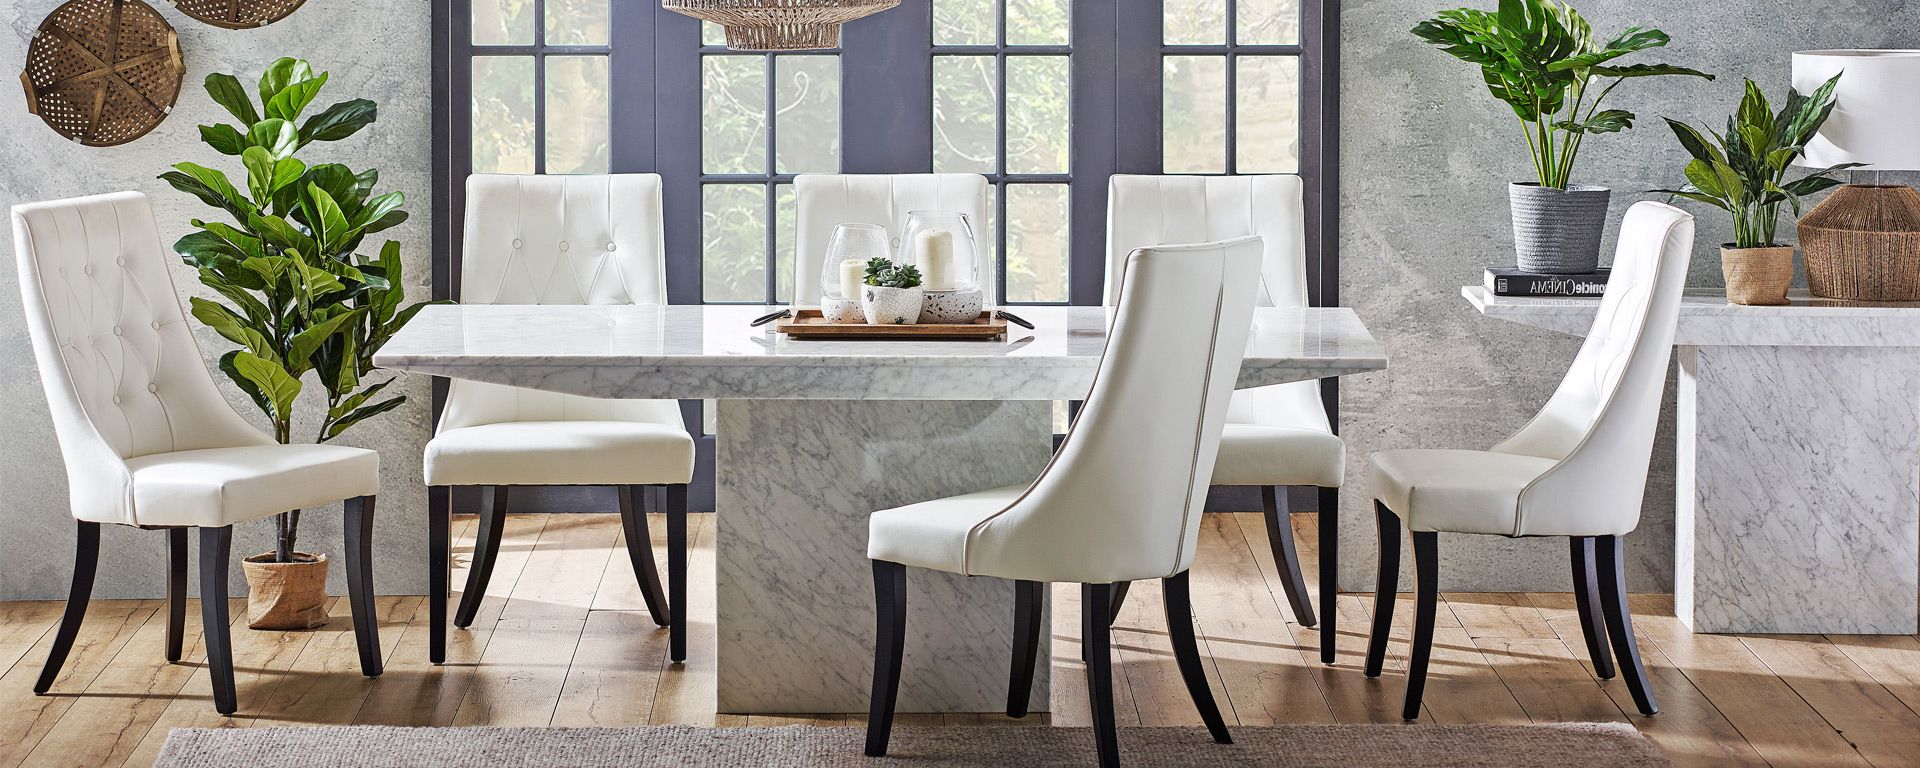 Dining Room Goals: 5 Trending Concrete And Stone Dining Intended For Industrial Concrete Like Buffets (Gallery 18 of 20)